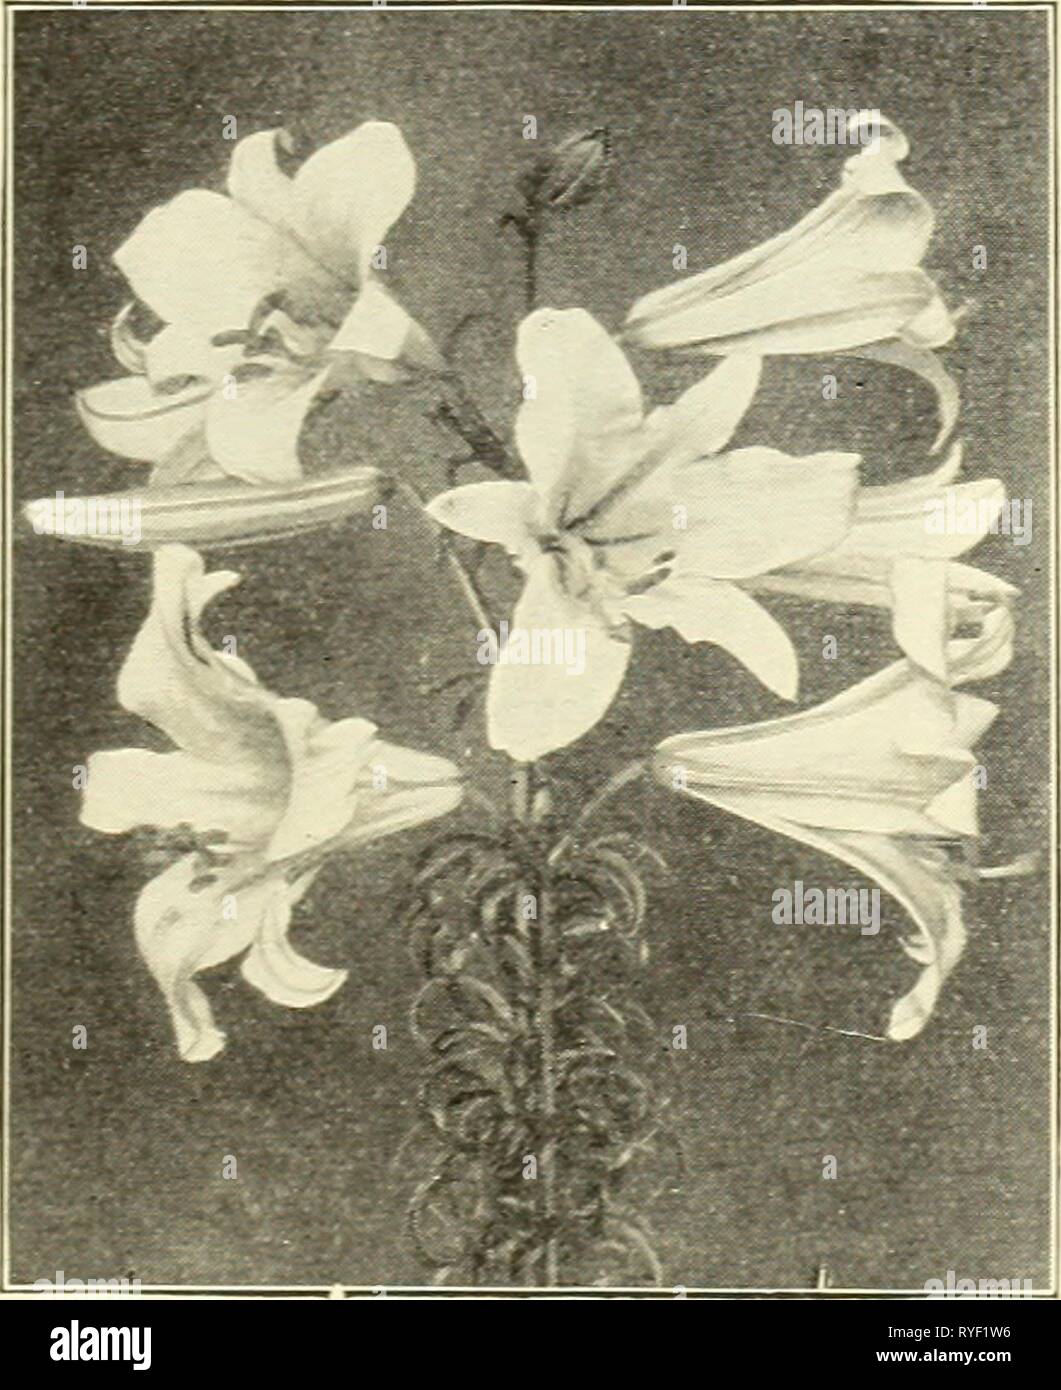 Dreer's wholesale price list for florists  dreerswholesalep1936henr Year: 1936  HENRY A. DREER Dreer's Quality Bulbs WHOLESALE LIST Hardy Lilies Auratum, Tigrinum, Phillippinense formosanum, and the Speciosums usually are received in early November, the other sorts in October. Per doz. Per 100 Auratum (Gold Banded Lily of Japan). Ivory white thickly studded with crim- son spots and striped with yellow. 3-5 feet. Blooms from July to Septem- ber. 9-11 inches circ $2 25 S15 00 Auratum platyphyllum (Macranthum). This is the Giant Gold Banded Lily which blooms from July to September. It has broader Stock Photo